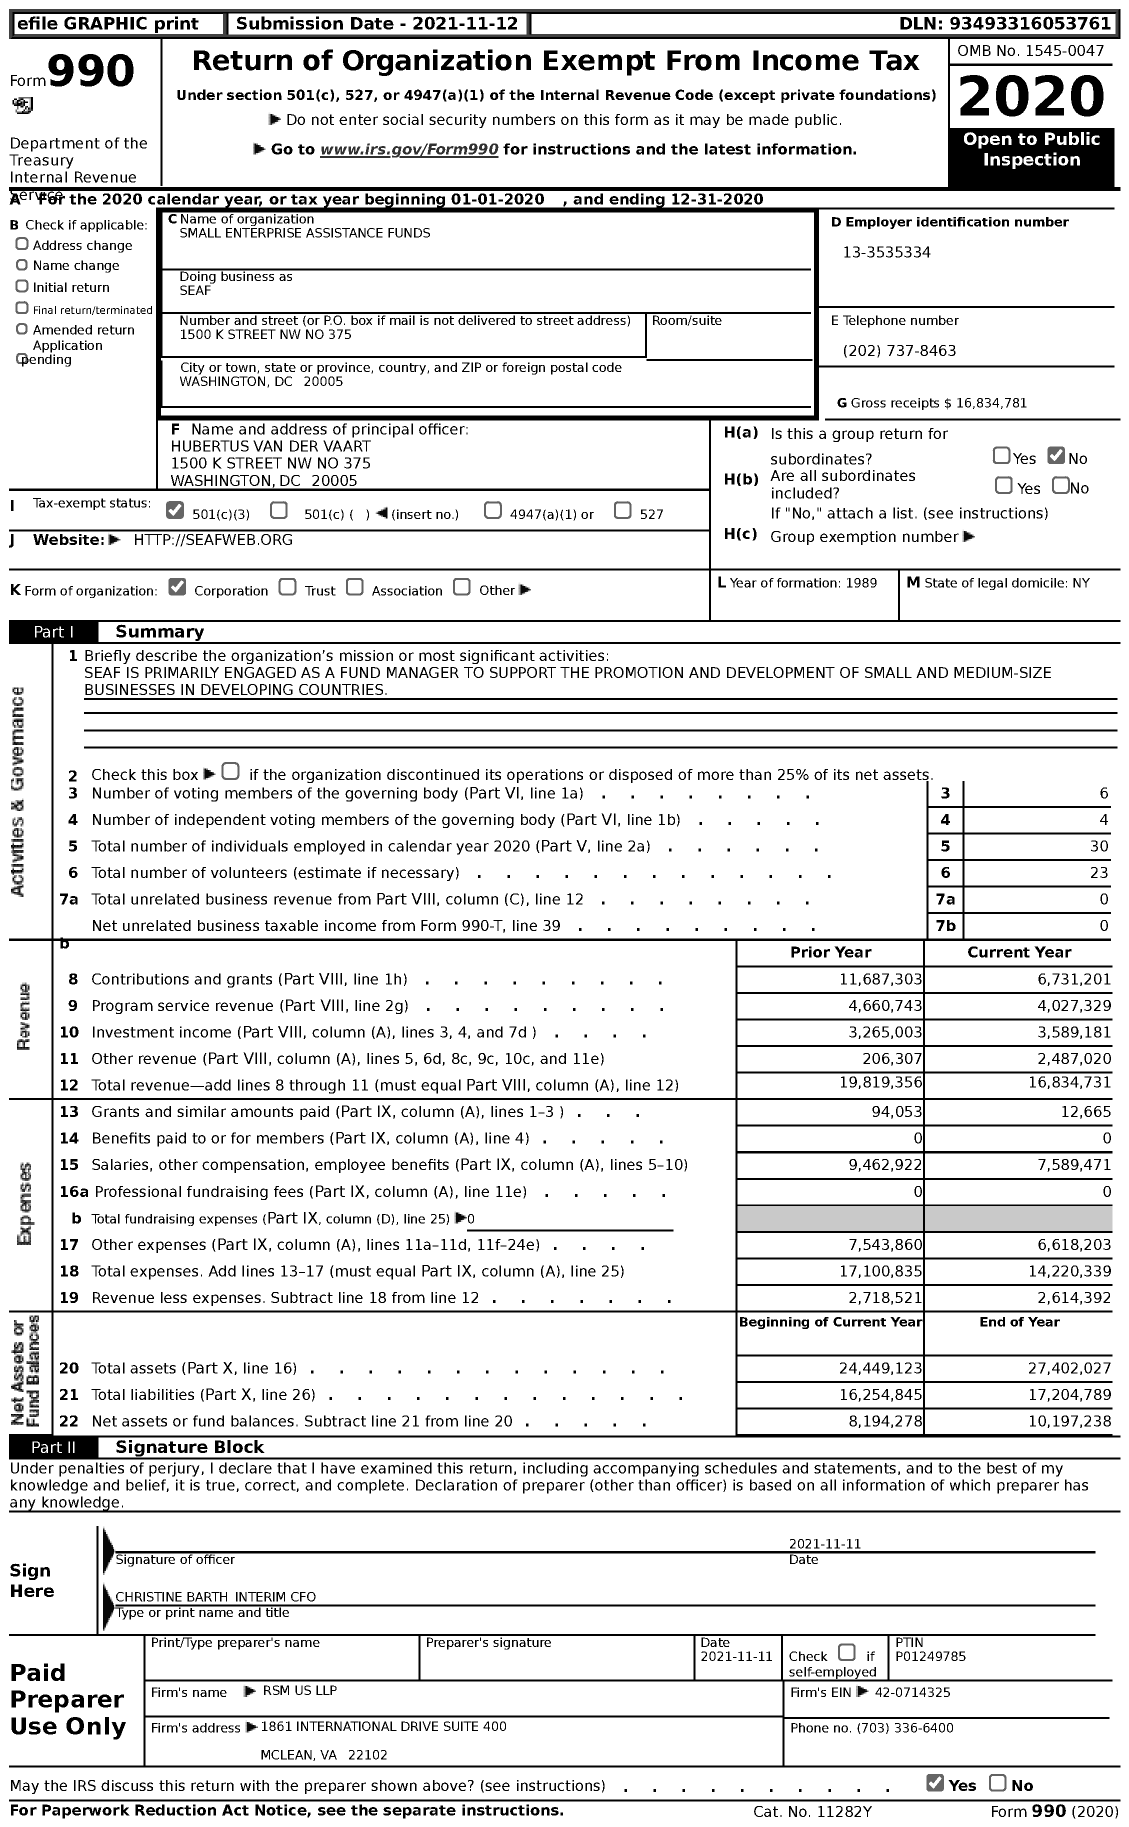 Image of first page of 2020 Form 990 for Small Enterprise Assistance Funds (SEAF)